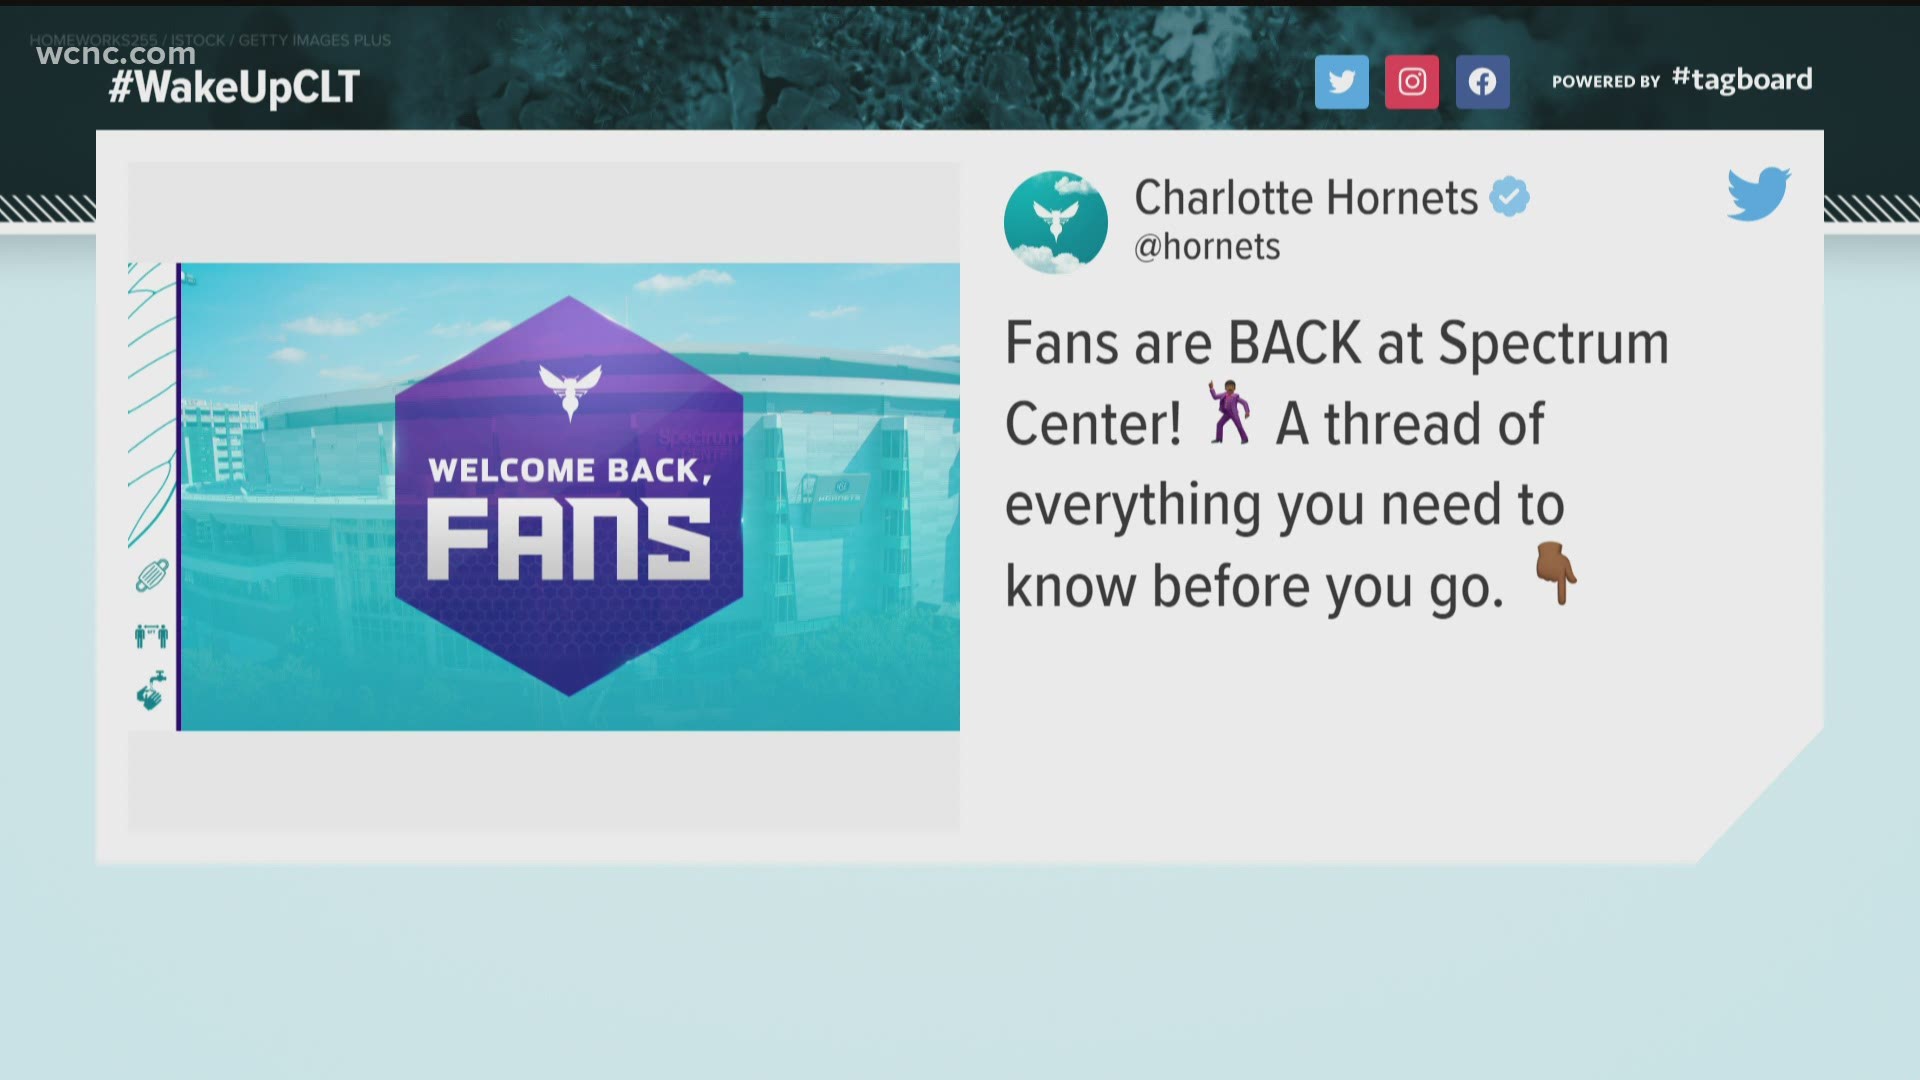 The Charlotte Hornets announced they will increase capacity to 30% after Gov. Roy Cooper said sporting venues can allow more fans to attend games starting this week.